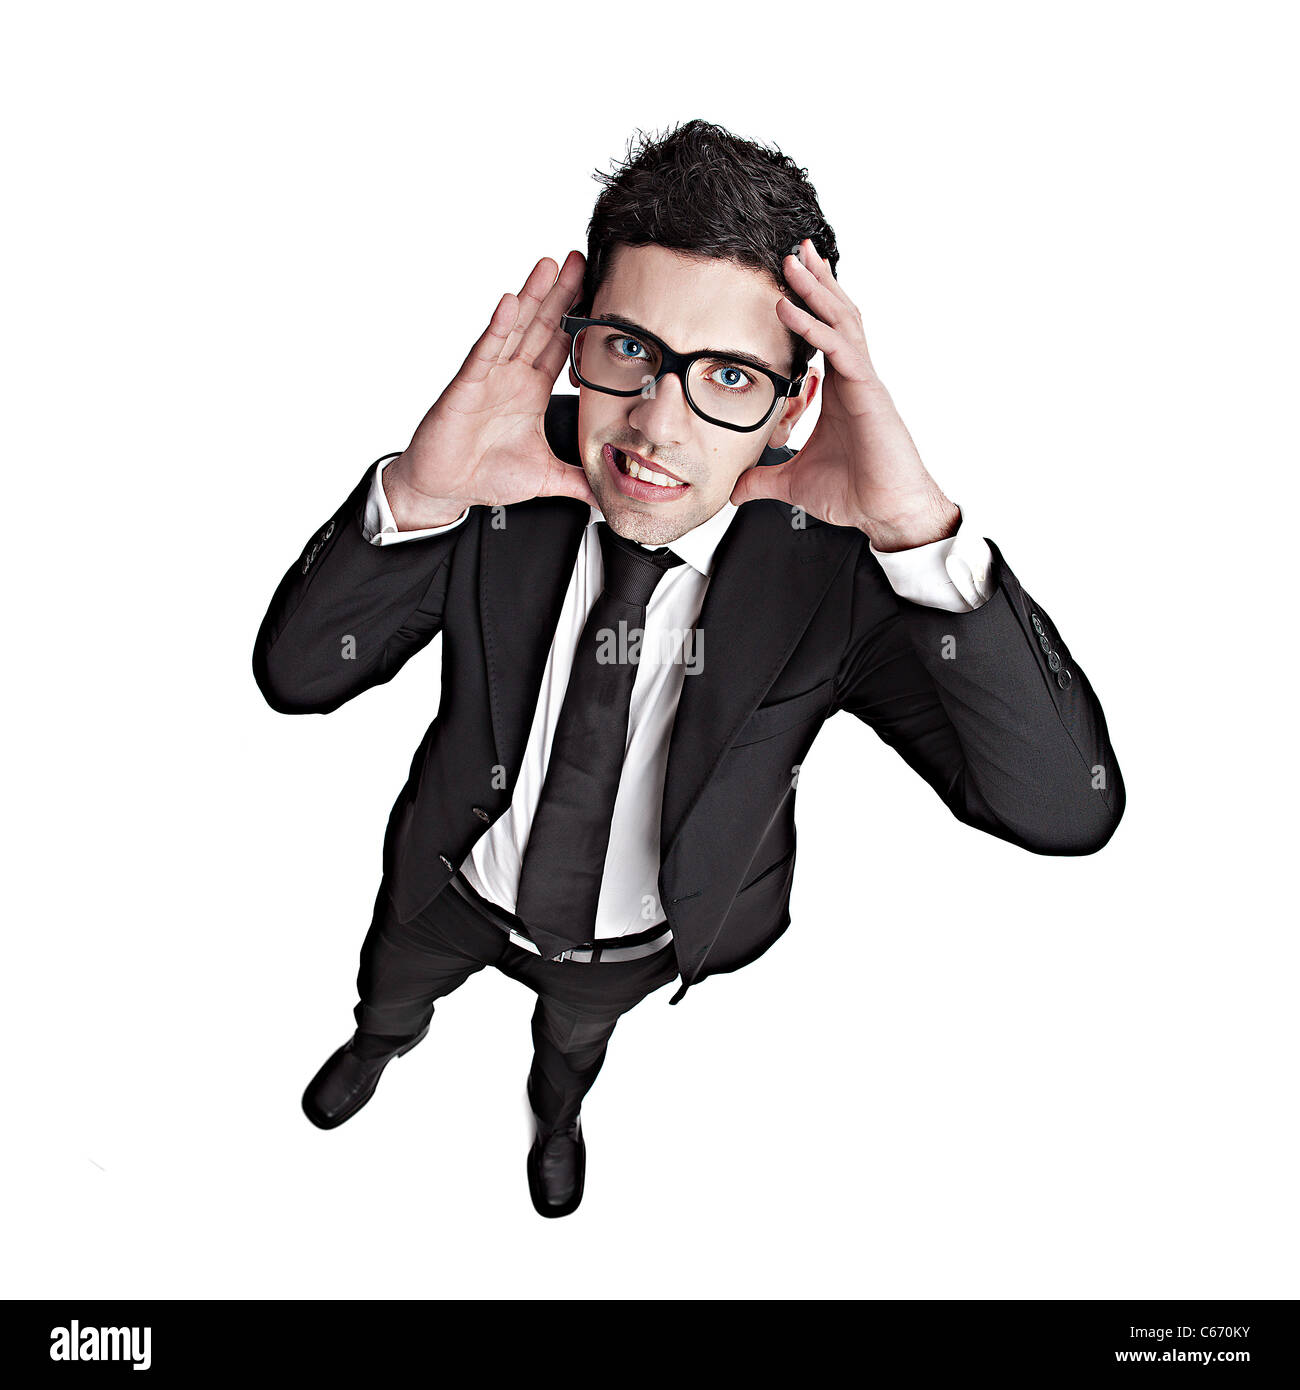 Funny portrait of a young businessman with a nerd glasses Stock Photo